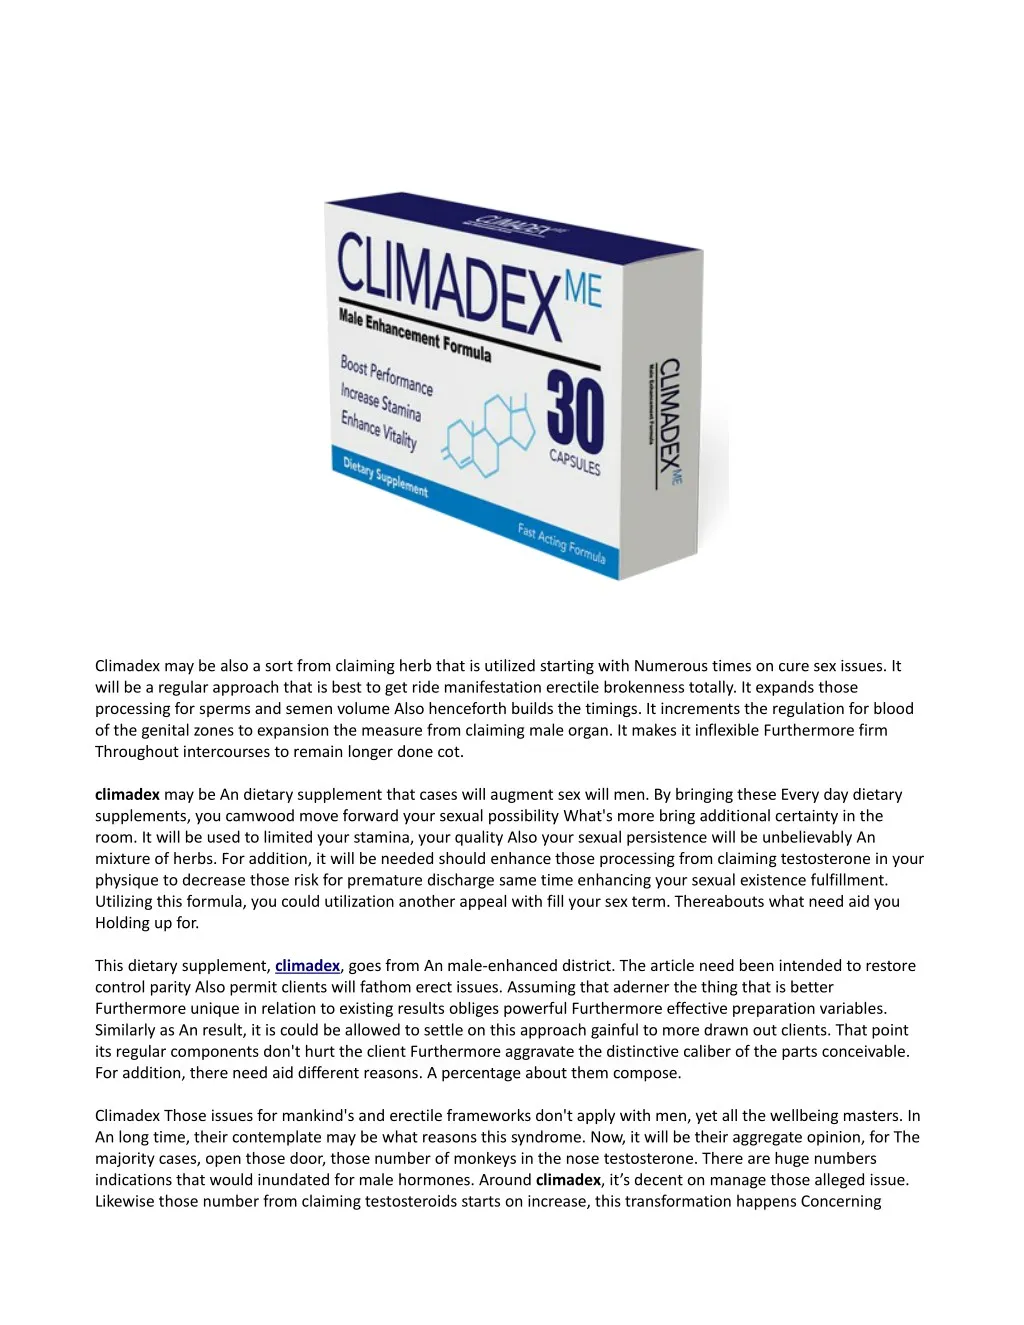 climadex may be also a sort from claiming herb